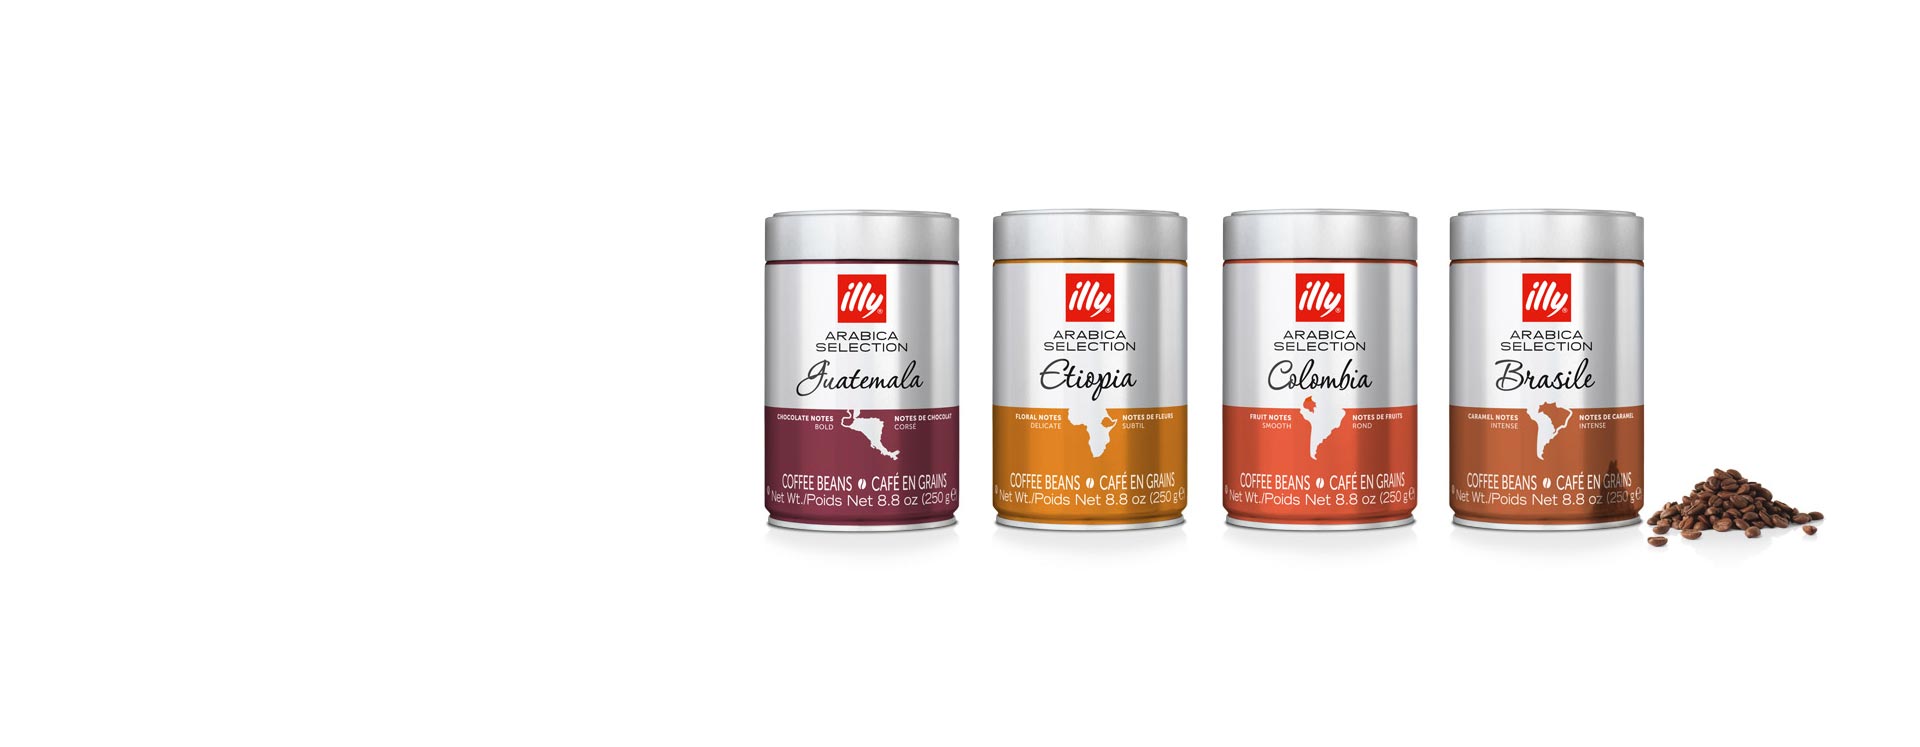 illy Best Selling Coffee and Espresso and iperEspresso capsules